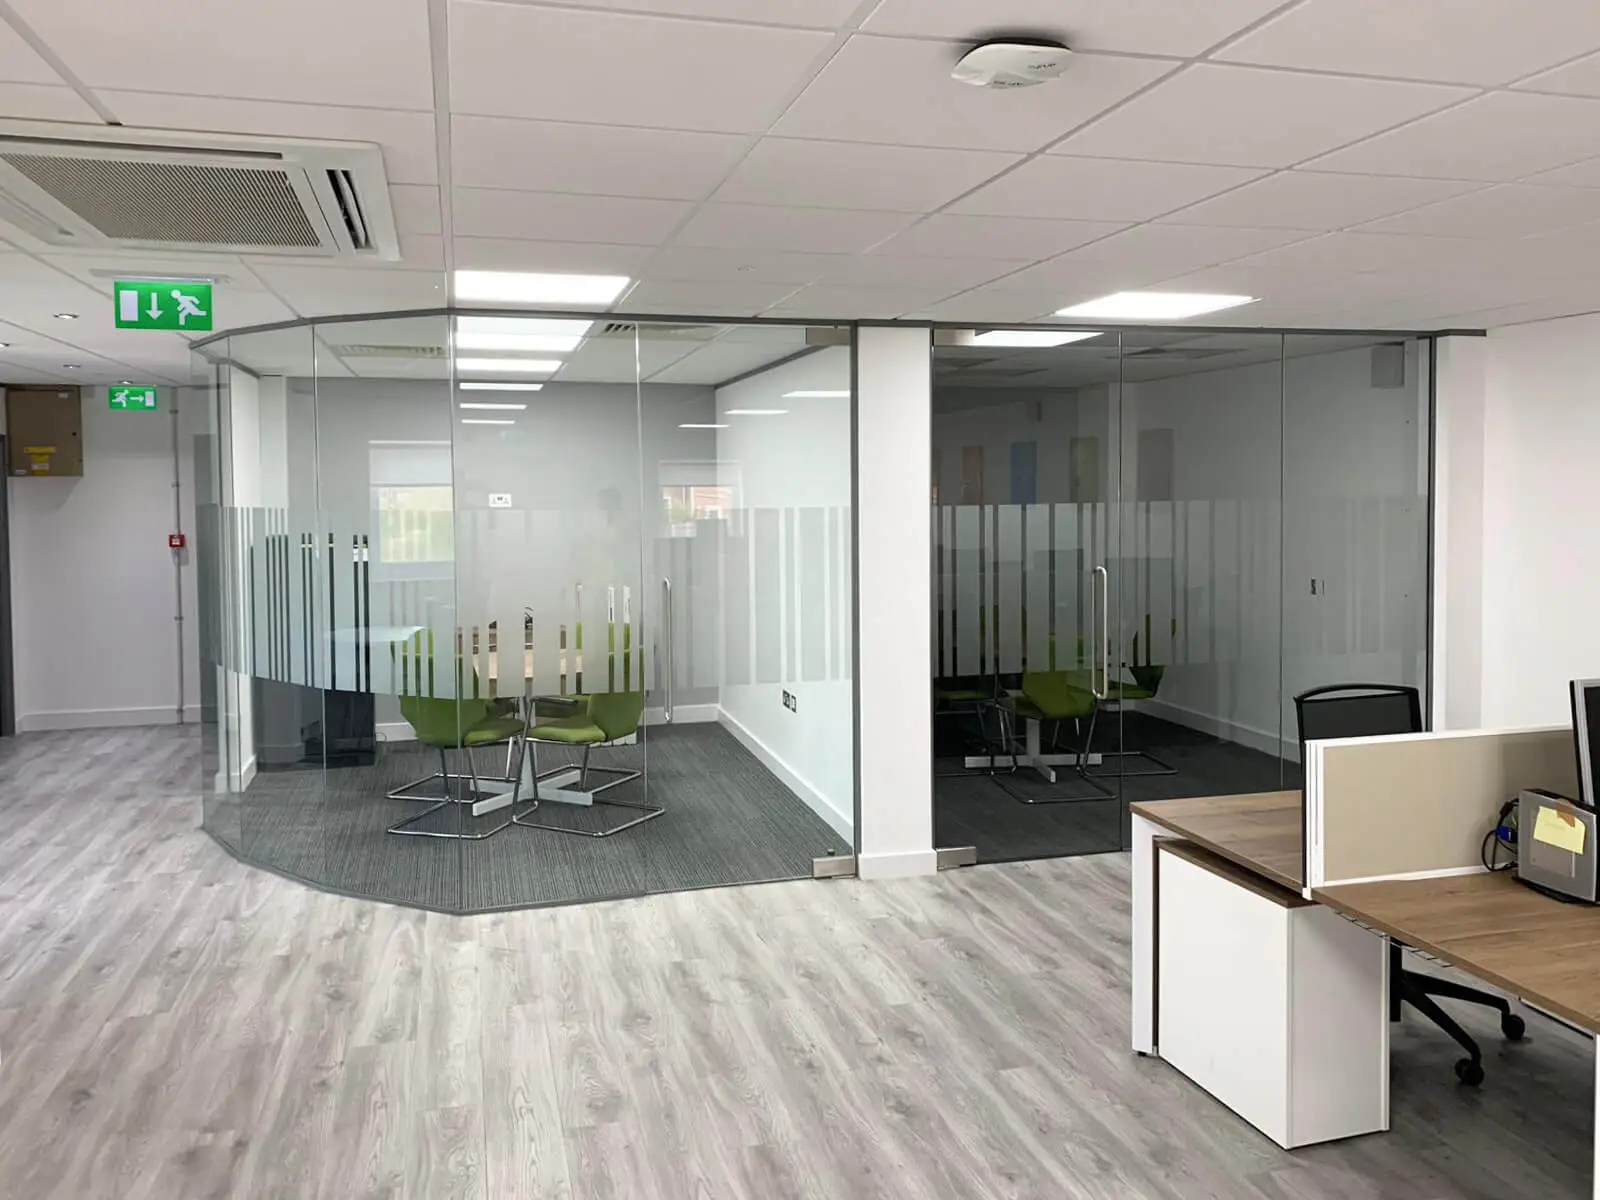 Meeting rooms speparated with glass walls and with designer floor